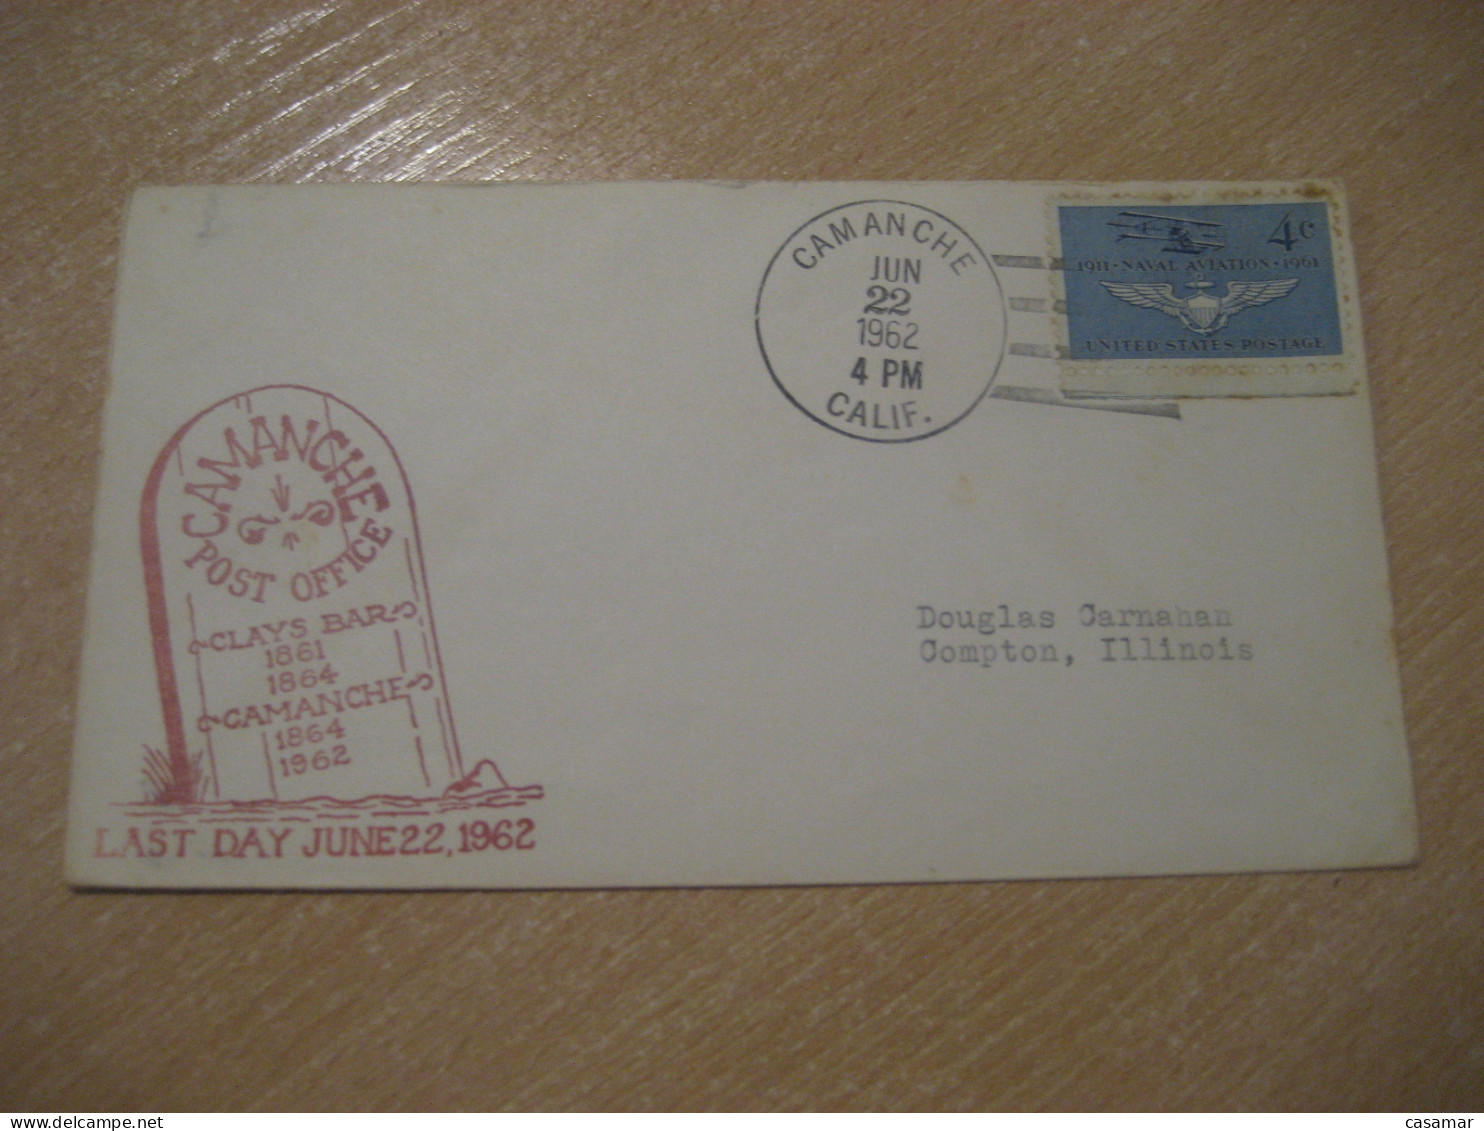 CAMANCHE 1962 Post Office Clays Bar Last Day American Indians Indian Cancel Cover USA Indigenous Native History - Indiani D'America